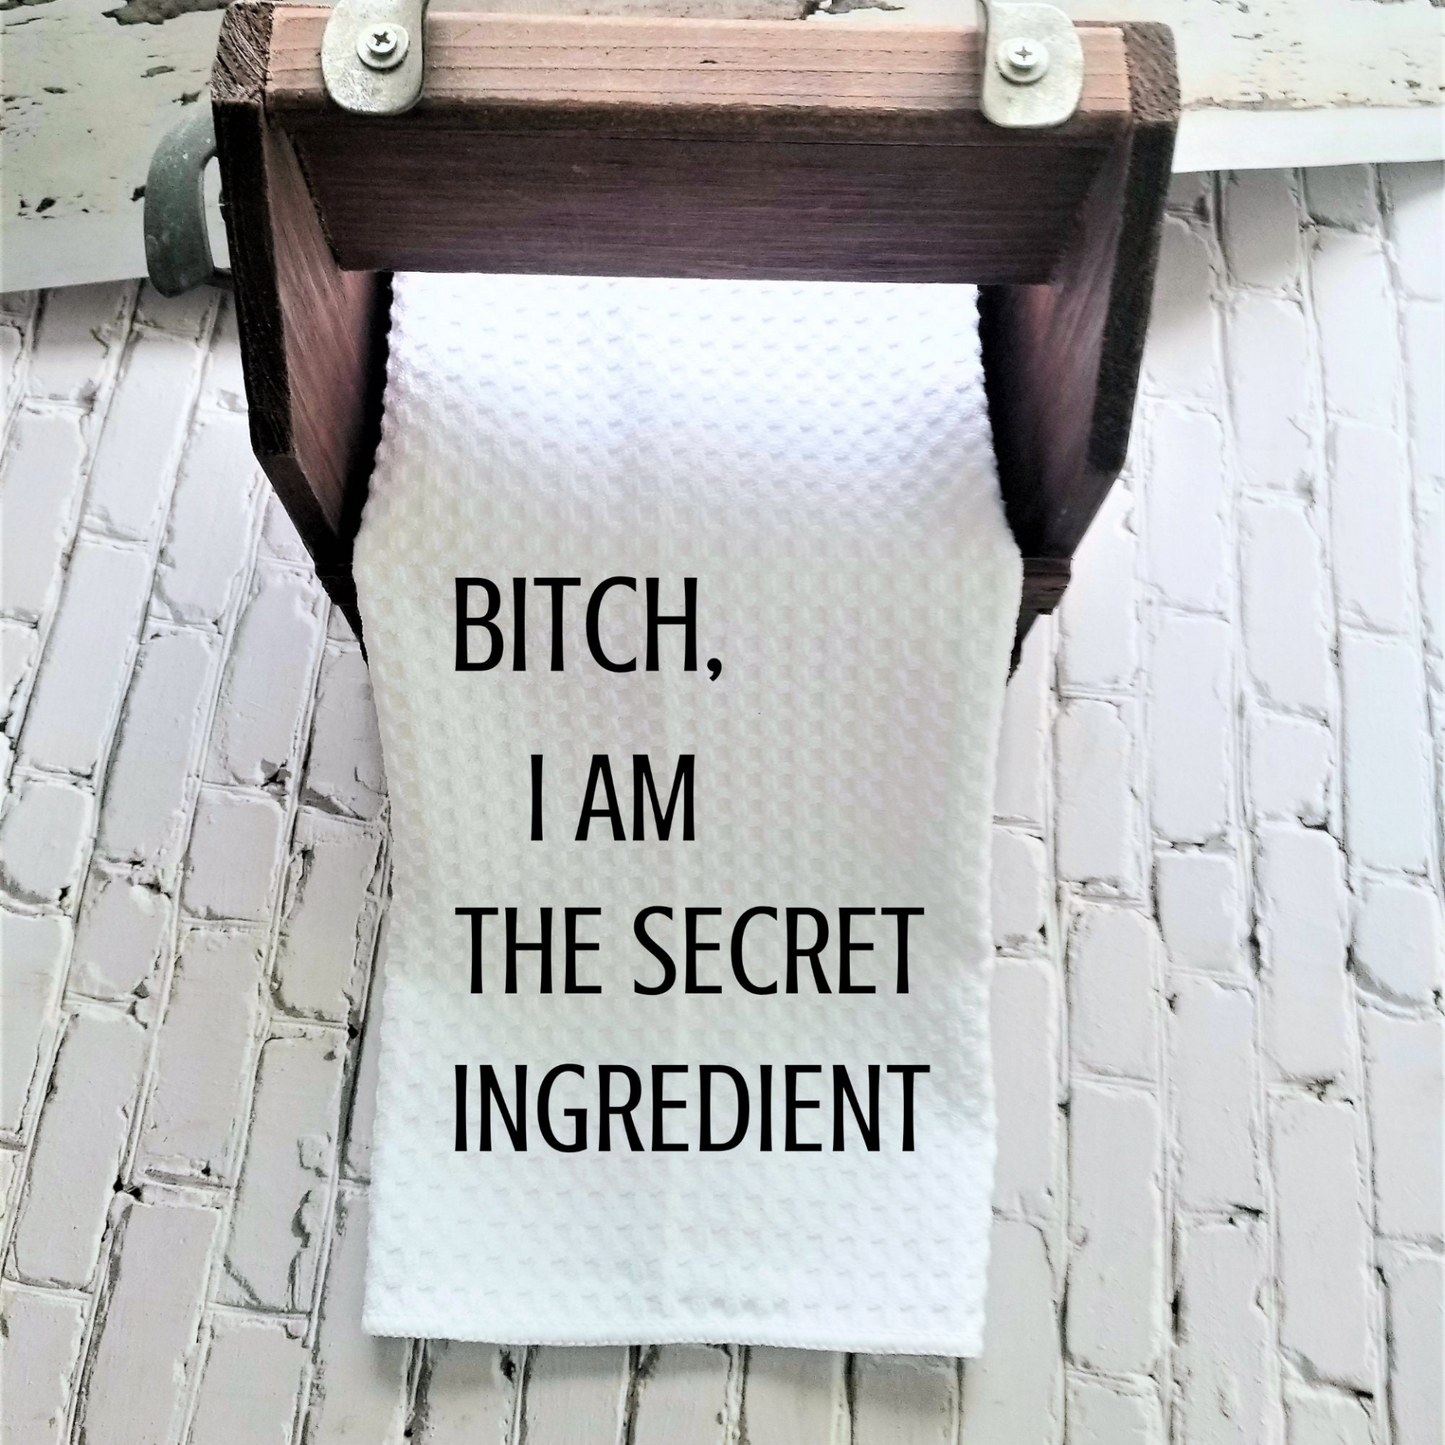 Bitch I Am the Secret Ingredient Funny Kitchen Towel Sayings | Farmhouse Sarcastic Dish Towel with Quote | Hand Towel Gift for Cook, Goodies N Stuff